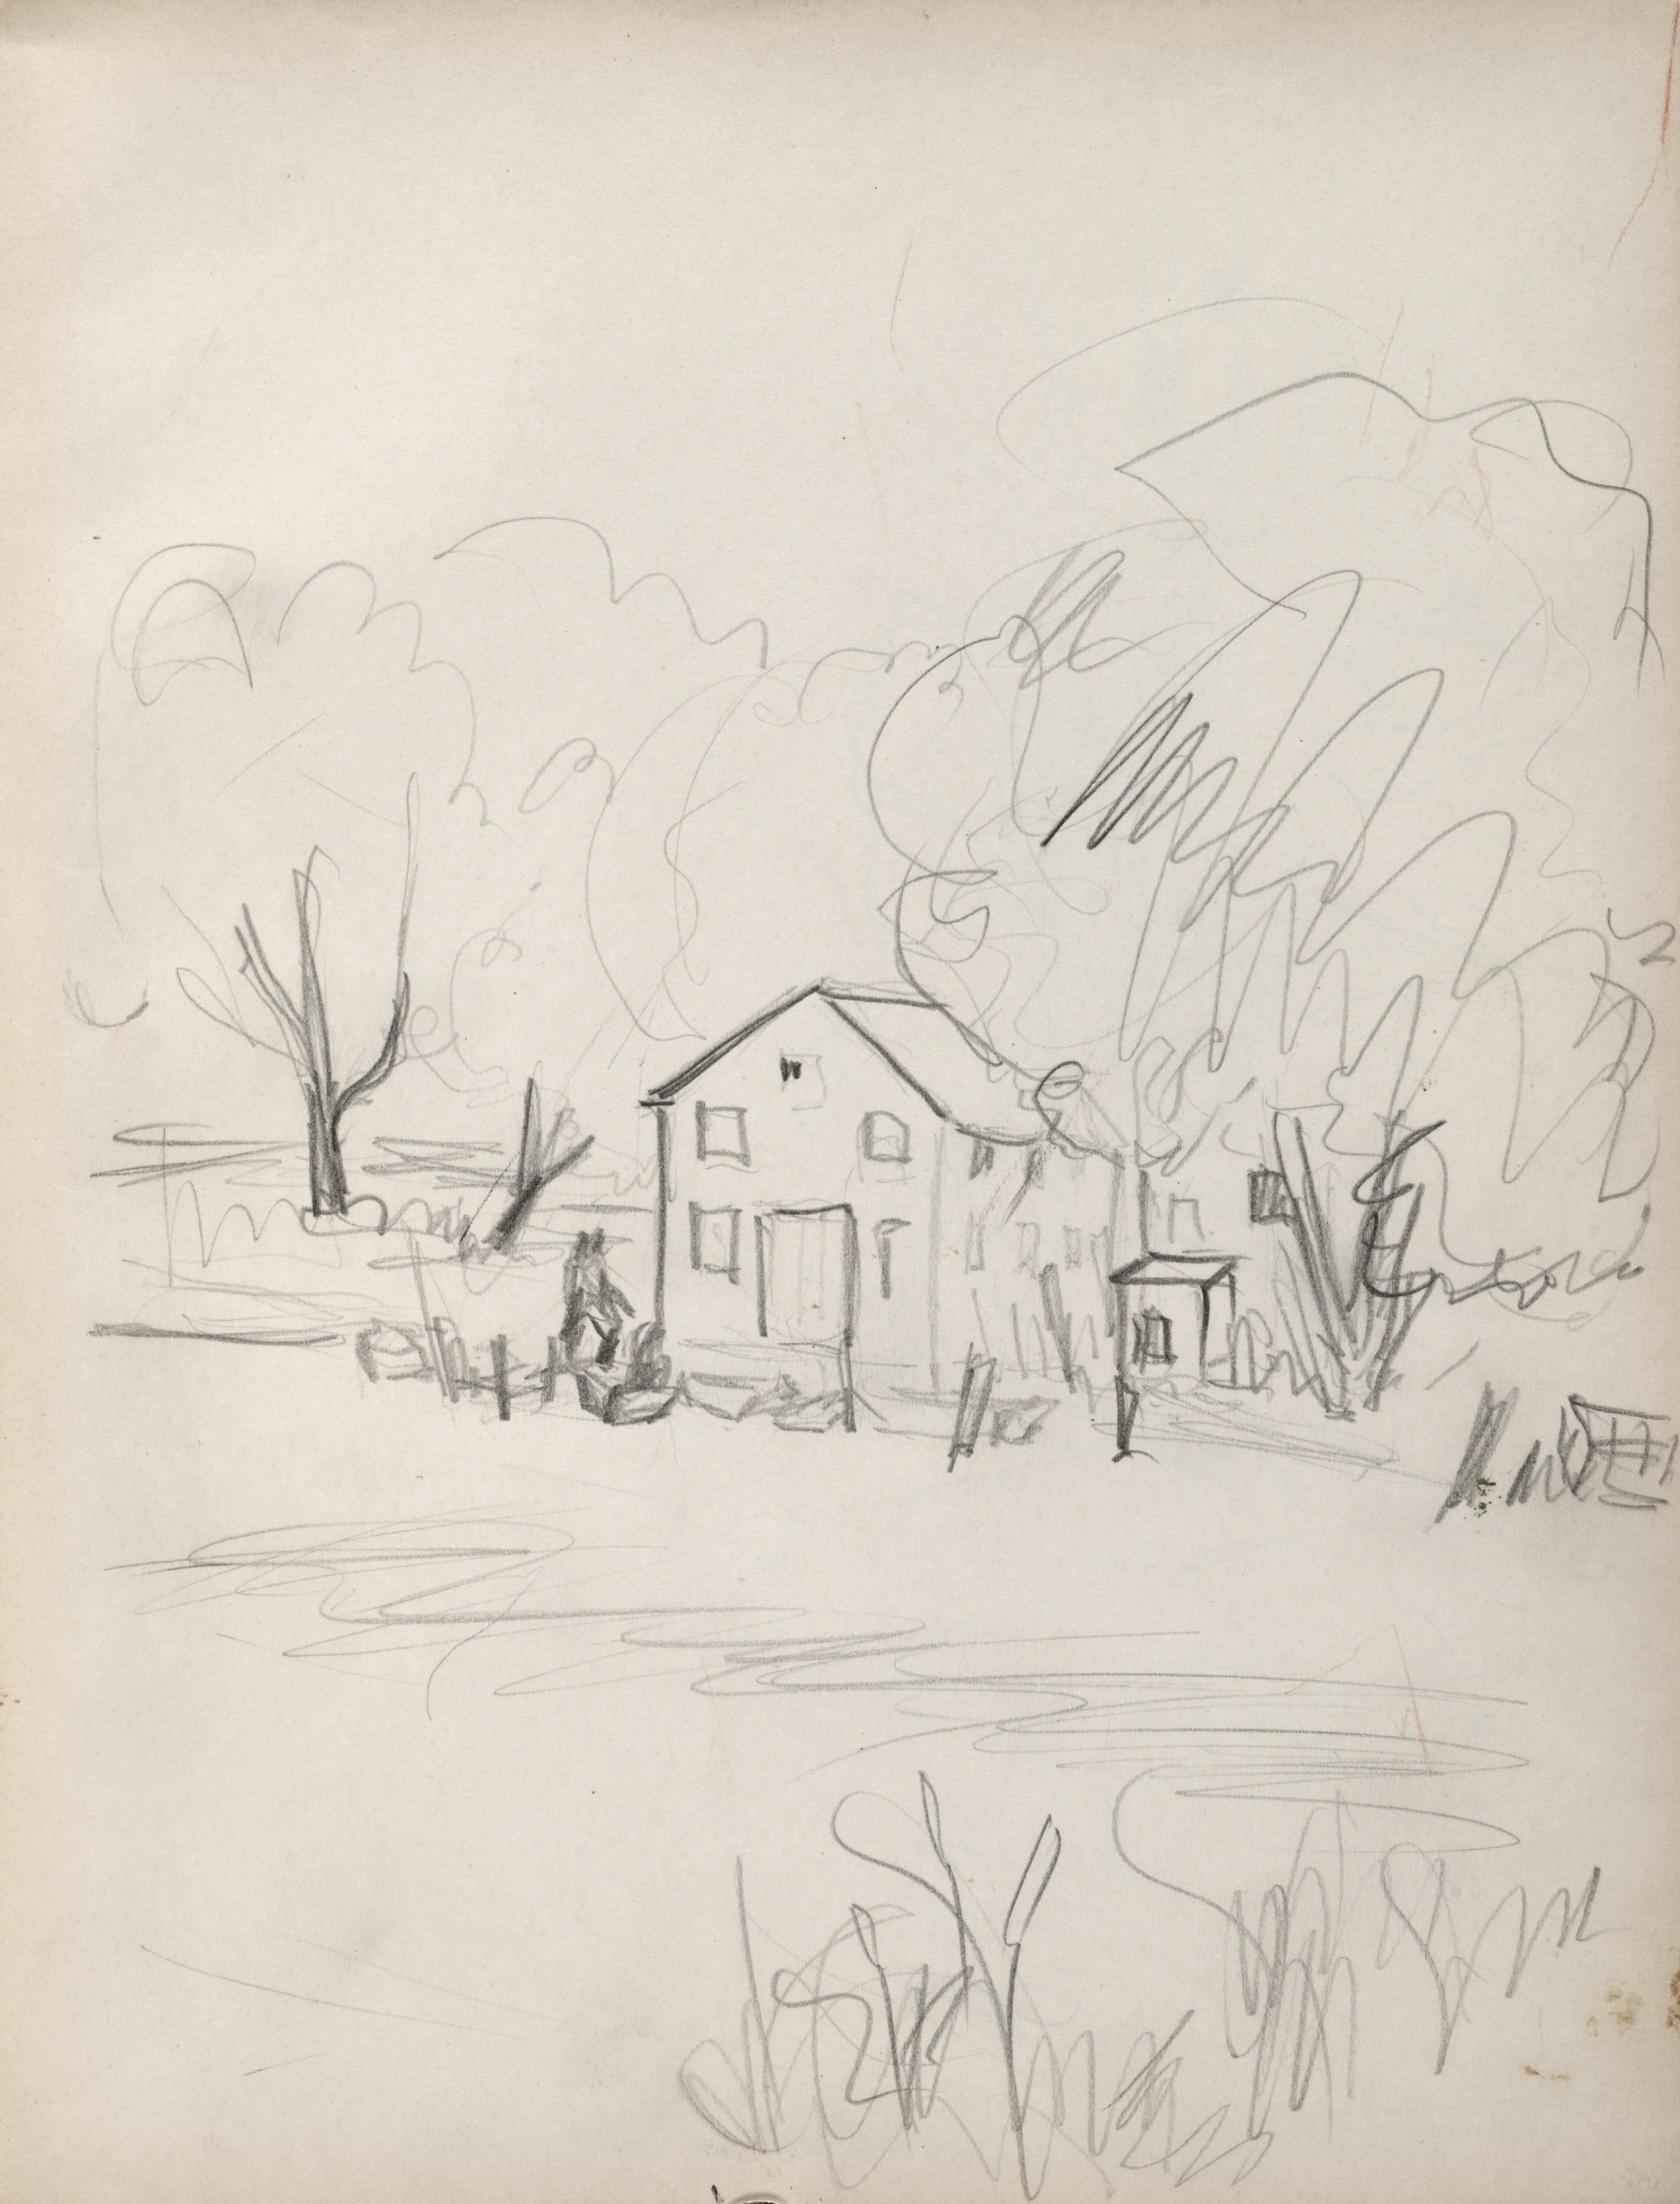 Sketchbook No. 2, page 147: House and trees